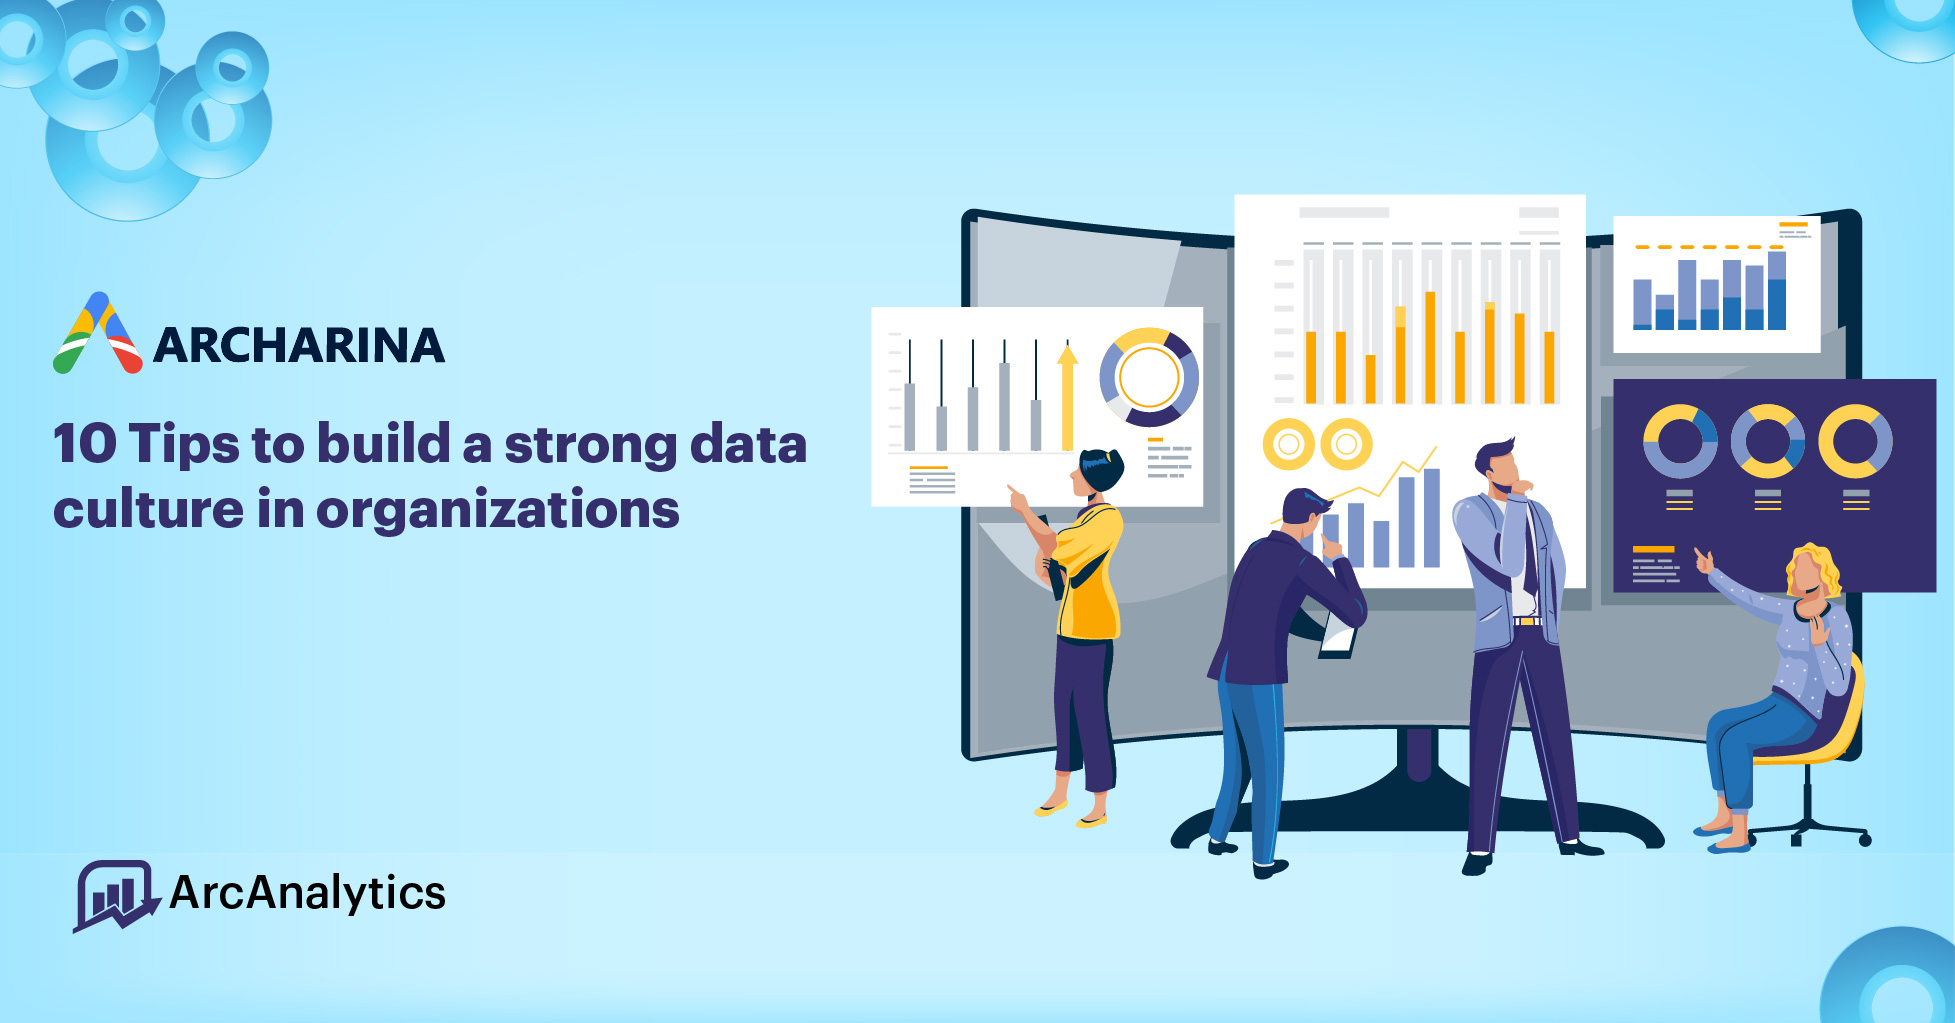 10 Tips to build a strong data culture in organizations